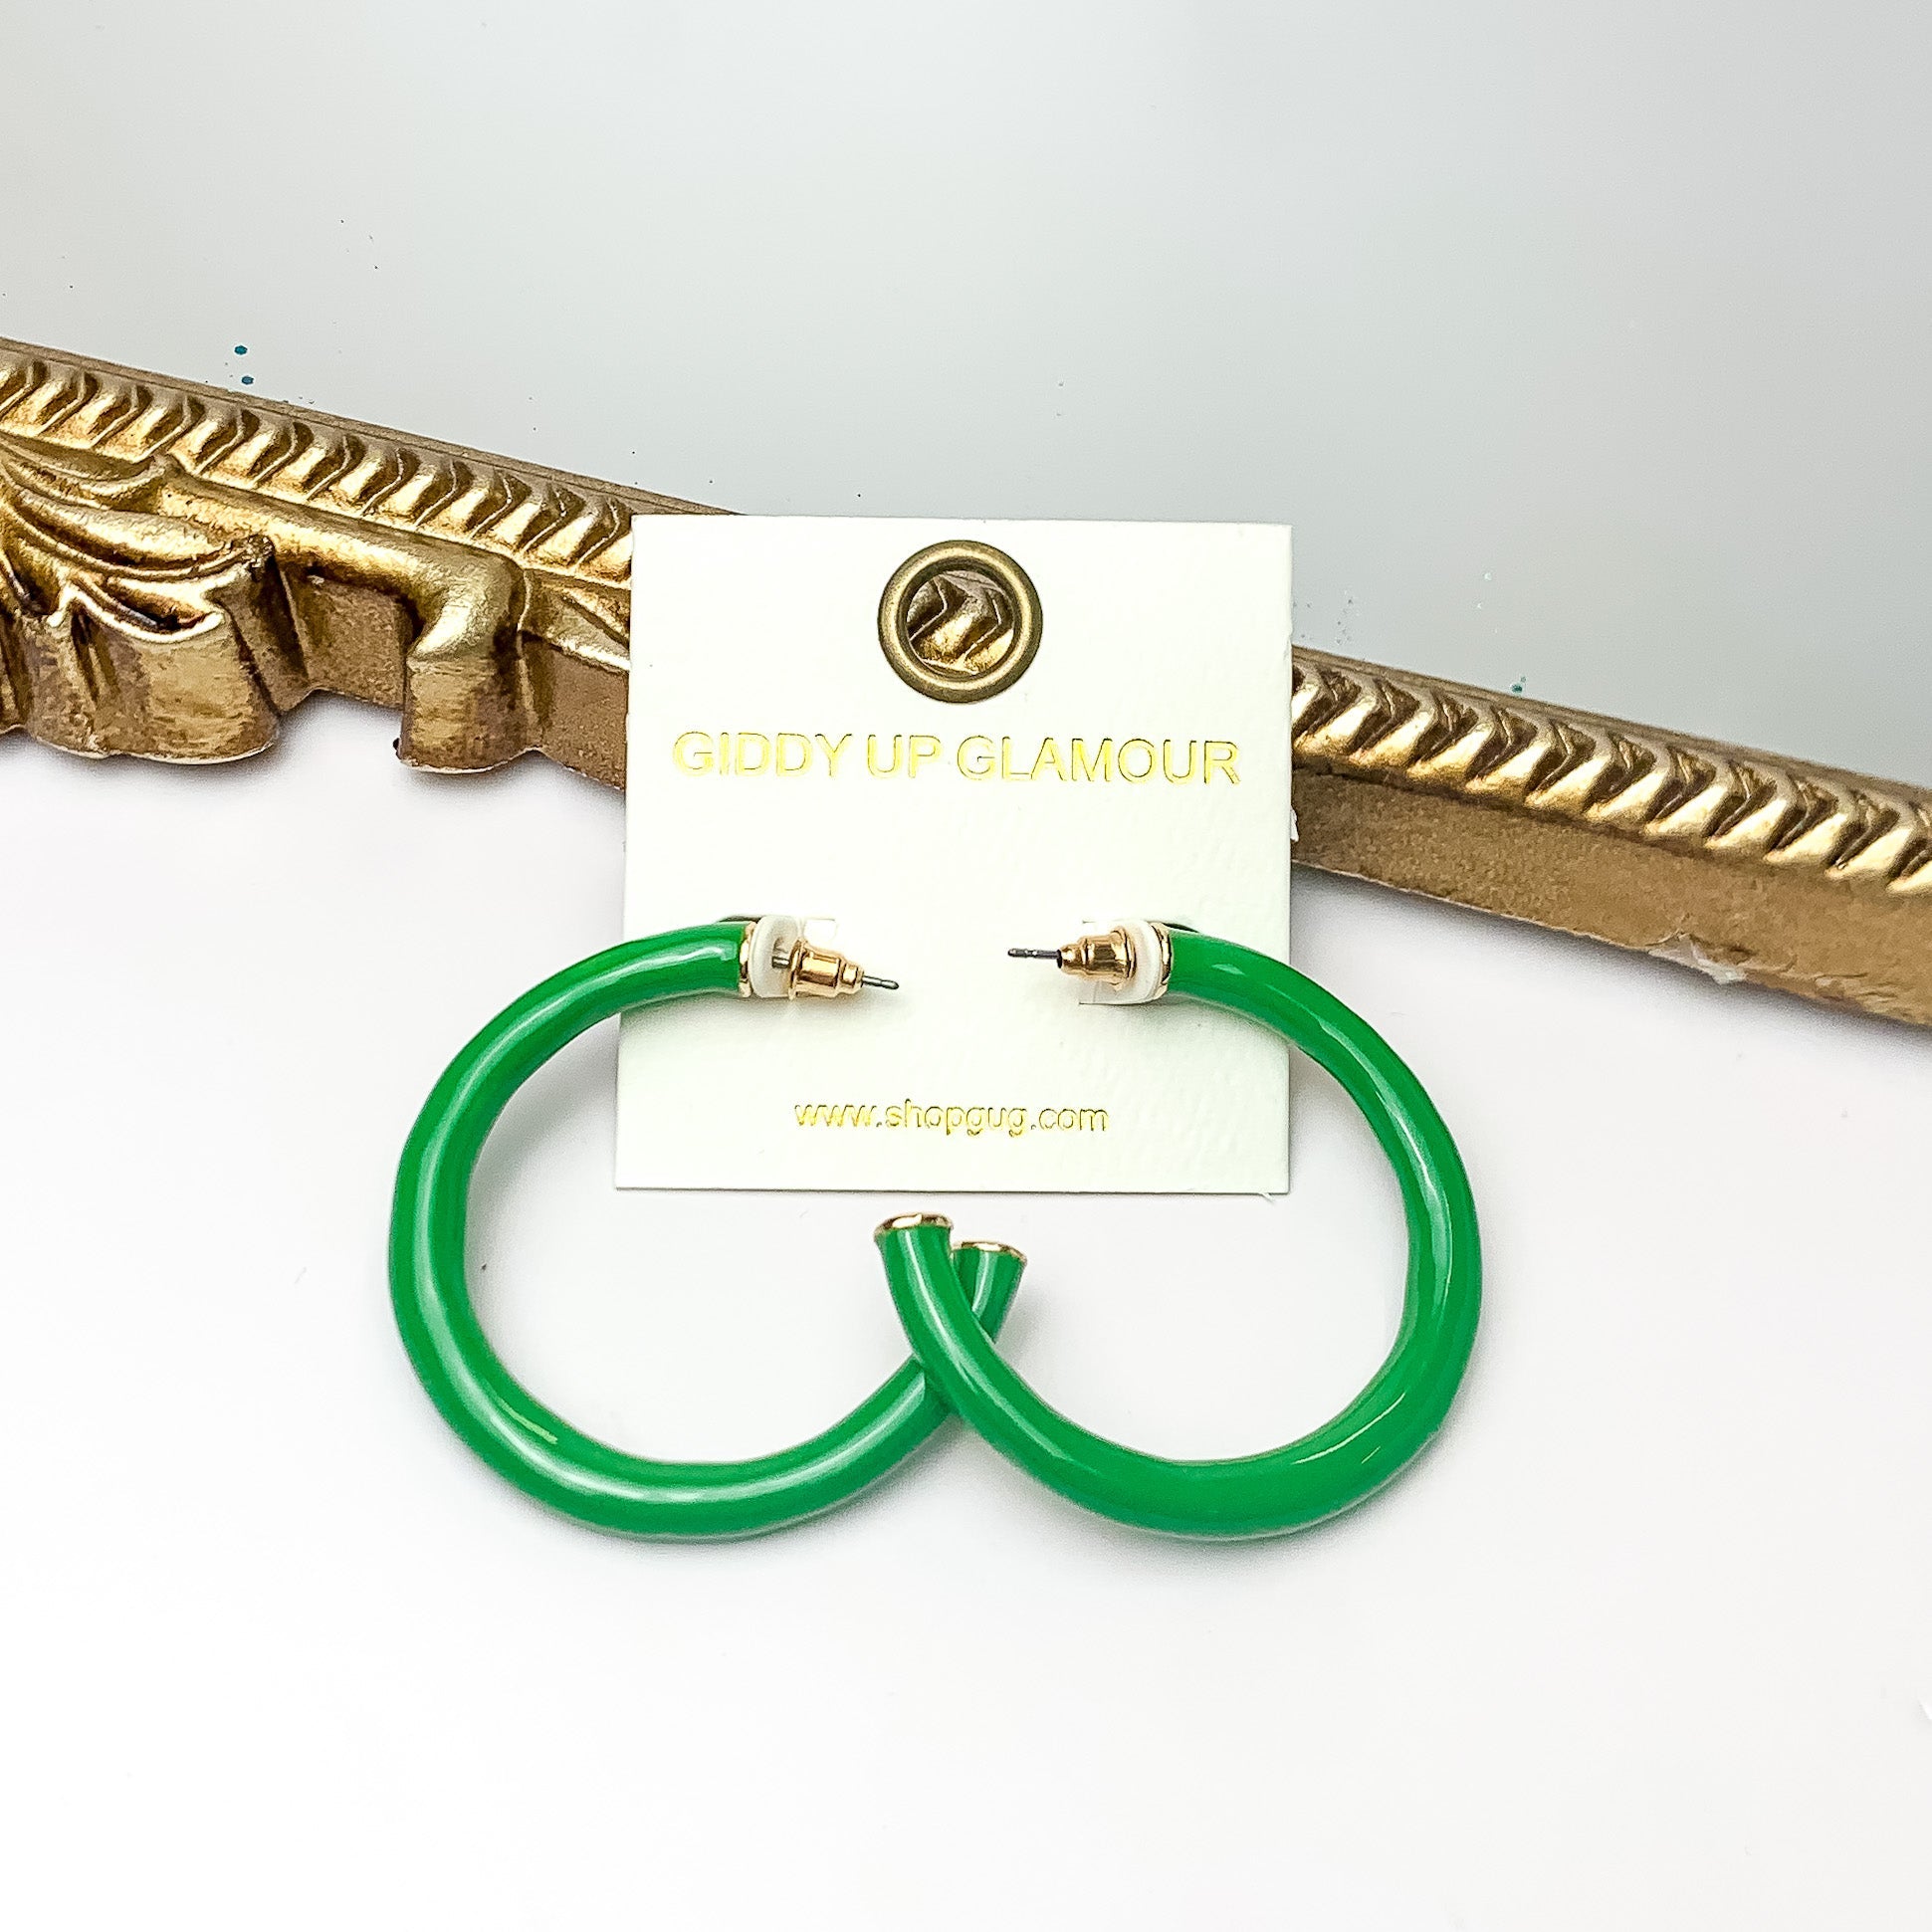 Plan For Cabo Large Hoop Earrings in Green. Pictured on a white background with a gold frame behind the earrings.